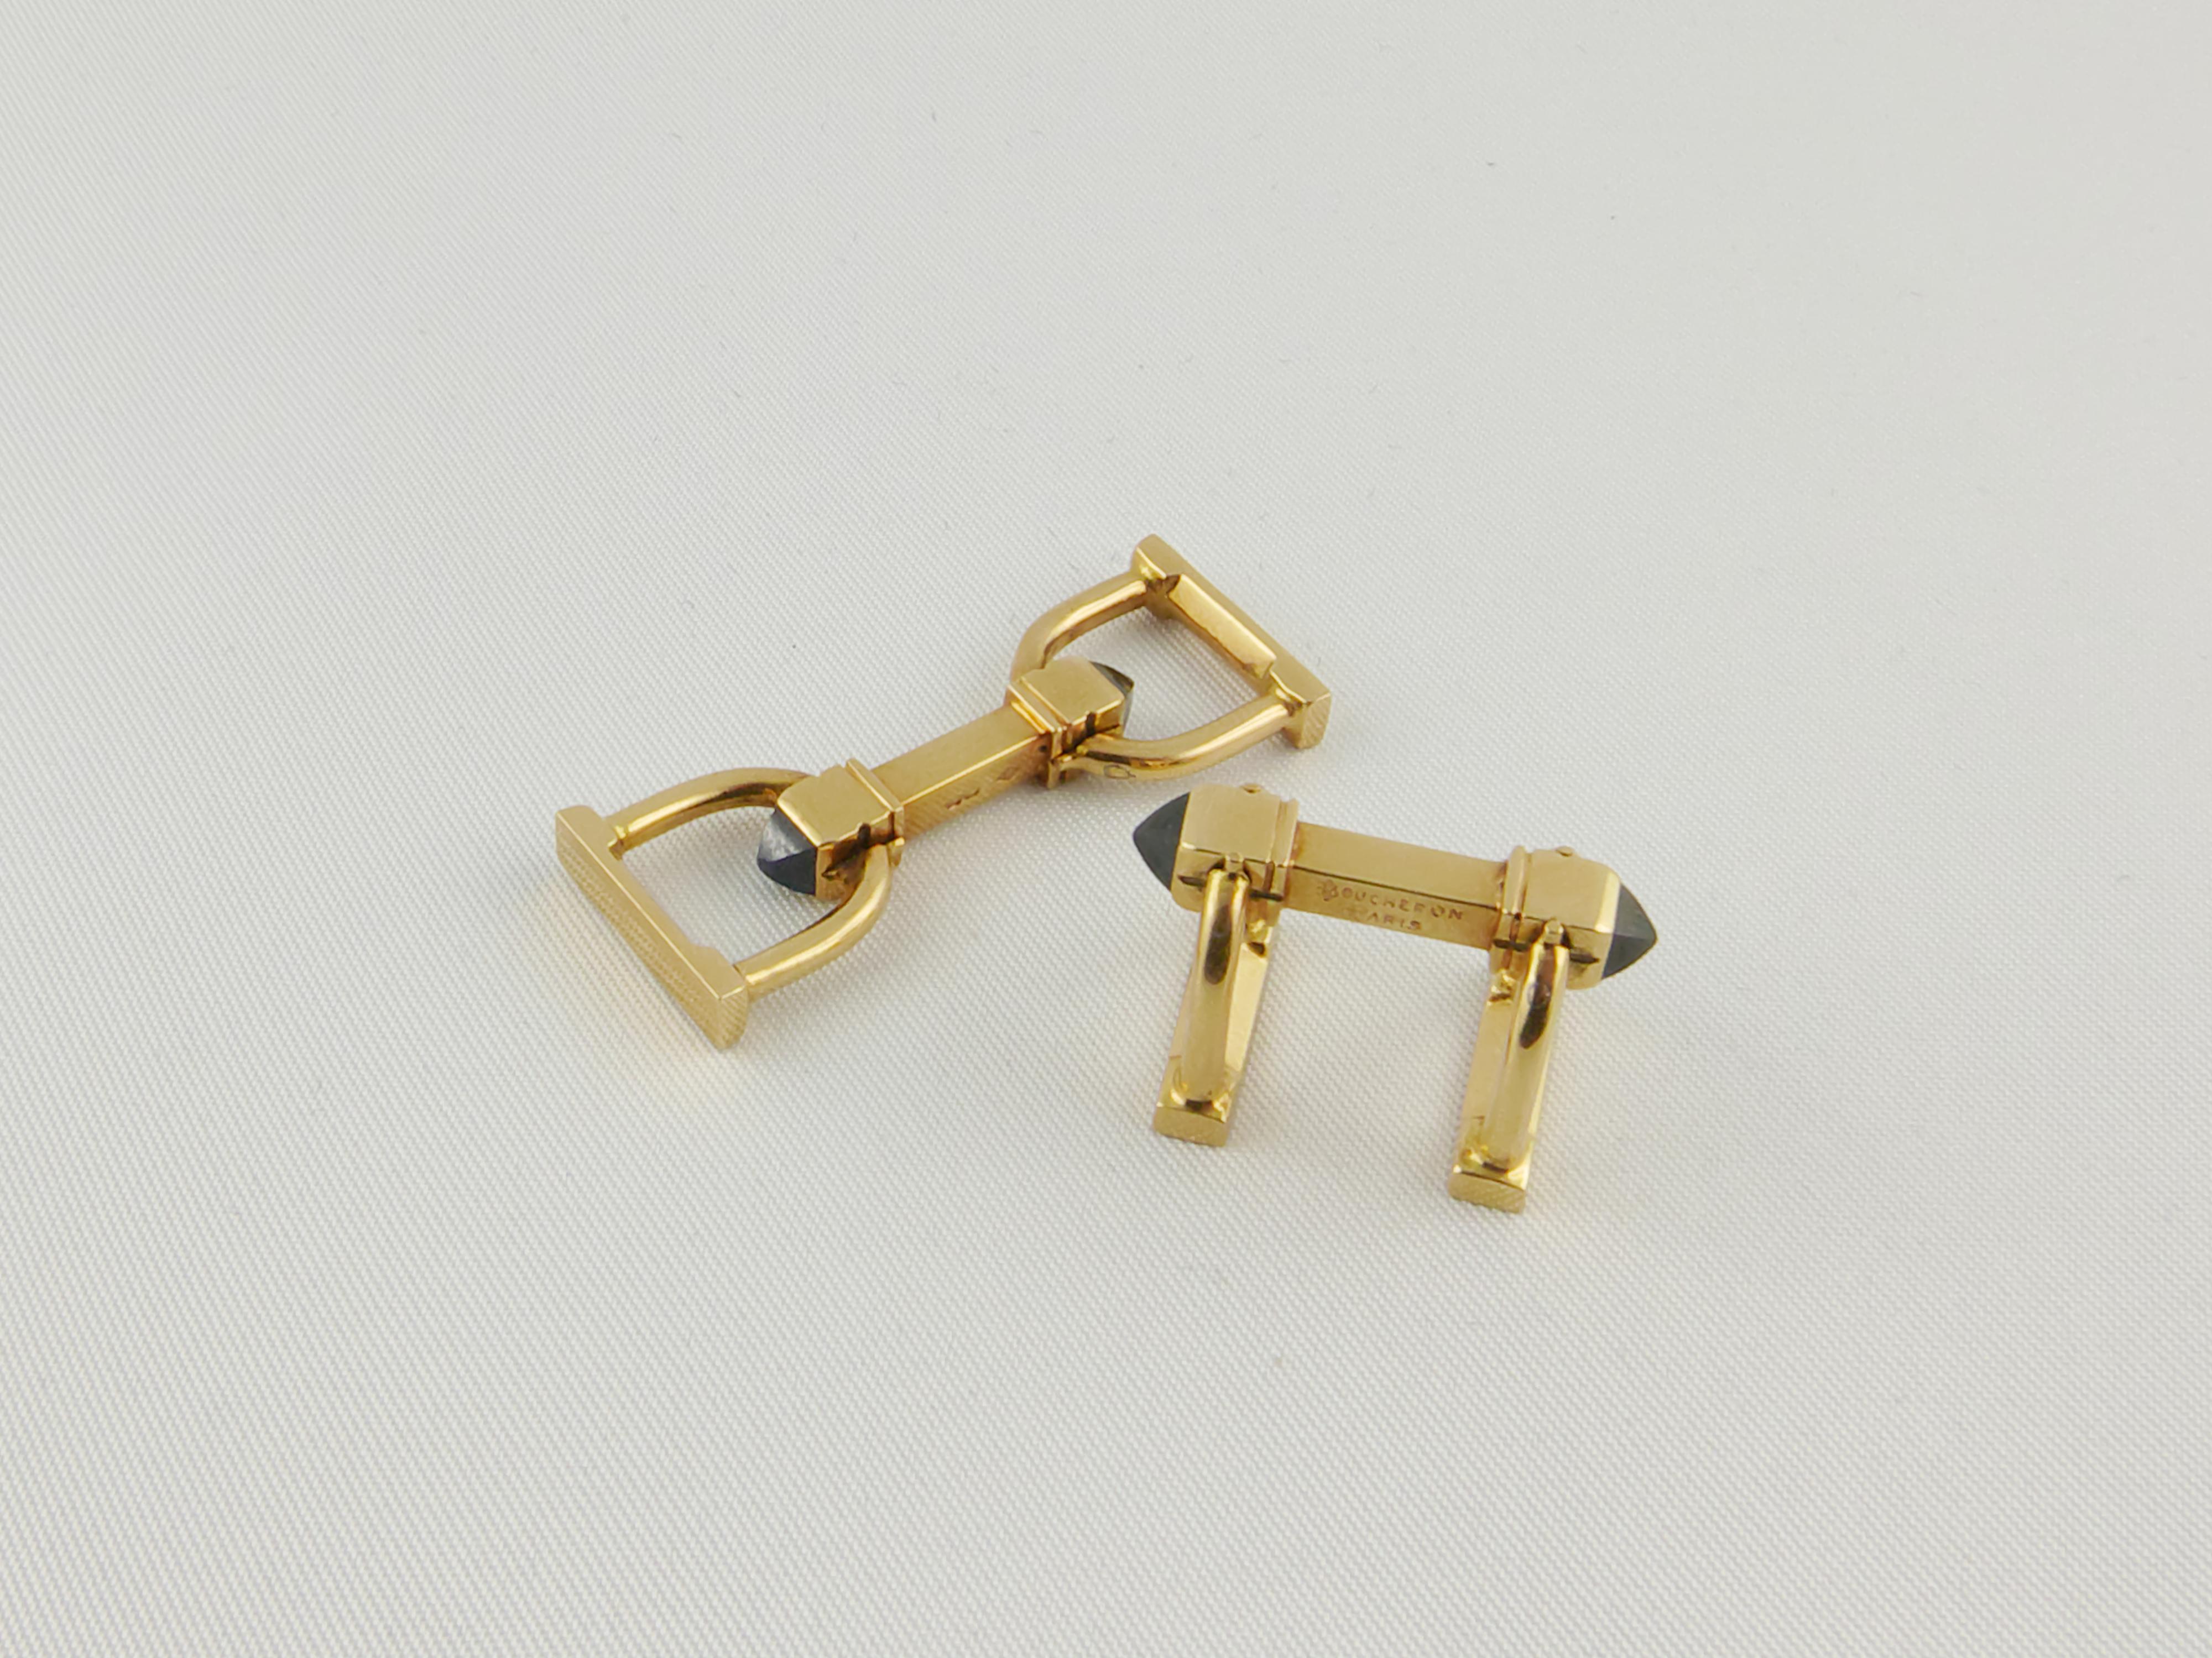 A pair of Sapphire and Yellow Gold stirrup folding Cufflinks finely crafted by  Boucheron in the 1960s.
Timeless and elegant, this pair of stirrup cufflinks are set in 18k Yellow Gold. Invisible hinges bend the stirrups, as seen in photo, adorned